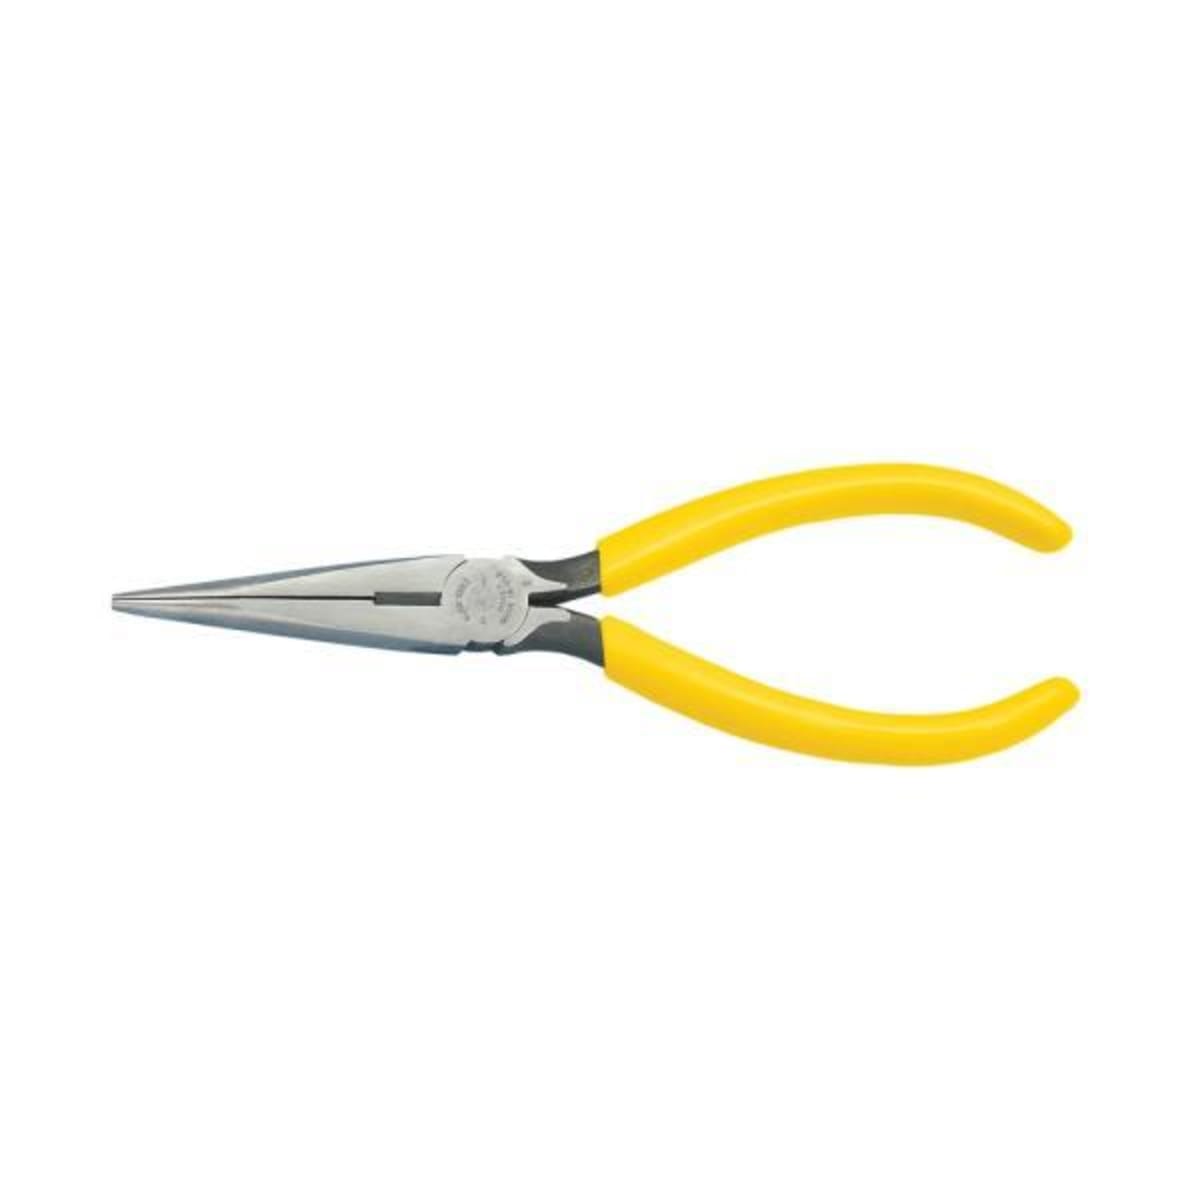 Irwin Vise-Grip 6 Needle Nose Side Cutting Pliers